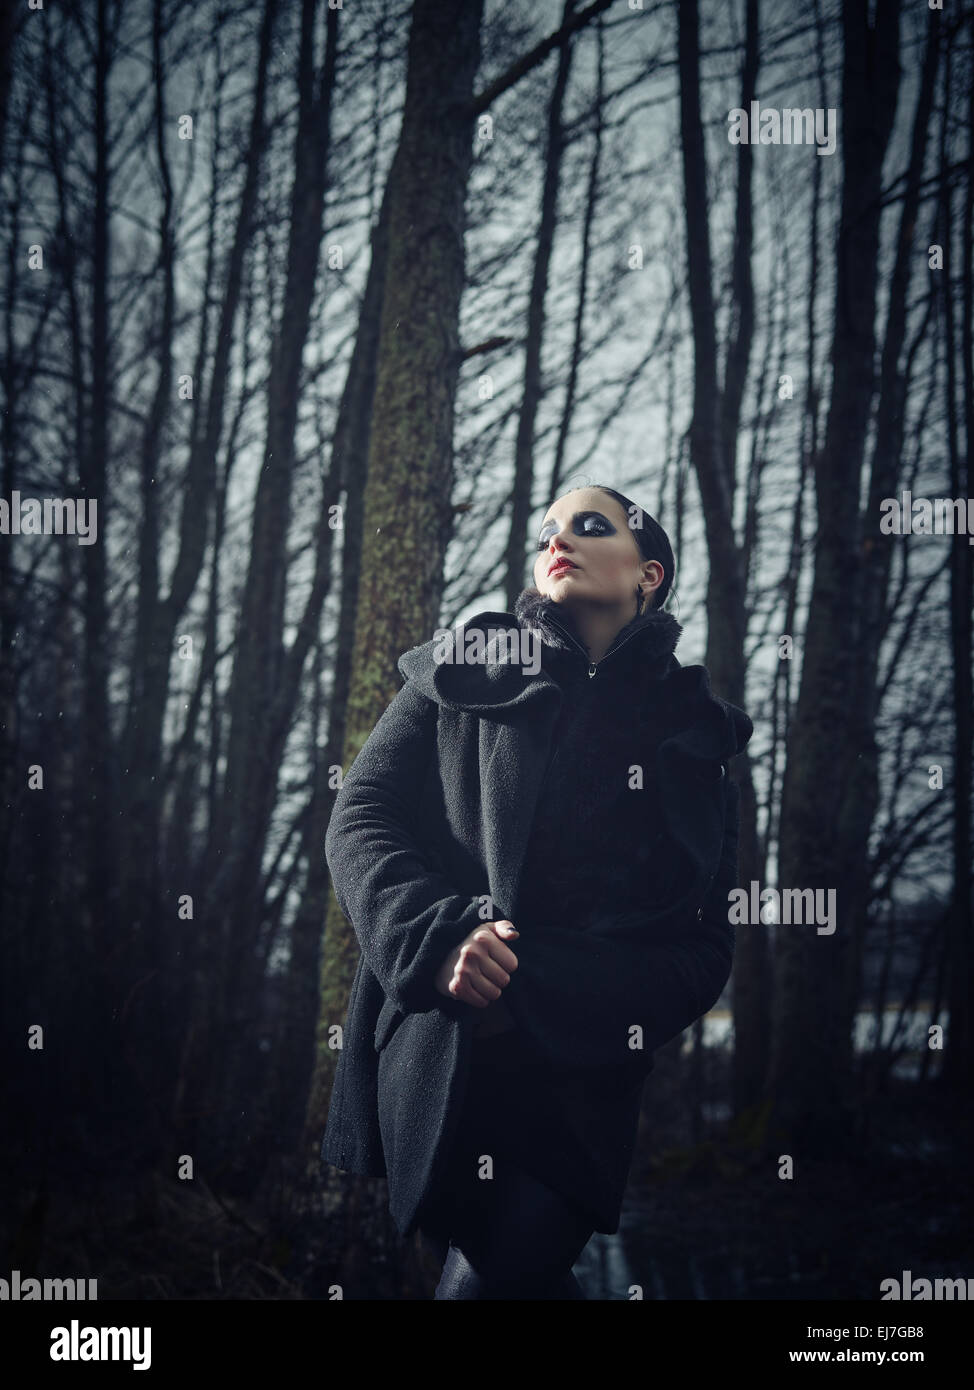 Fashion woman wearing a winter coat and she pose in a gloomy forest, cold rainy weather, cross processed full length image Stock Photo